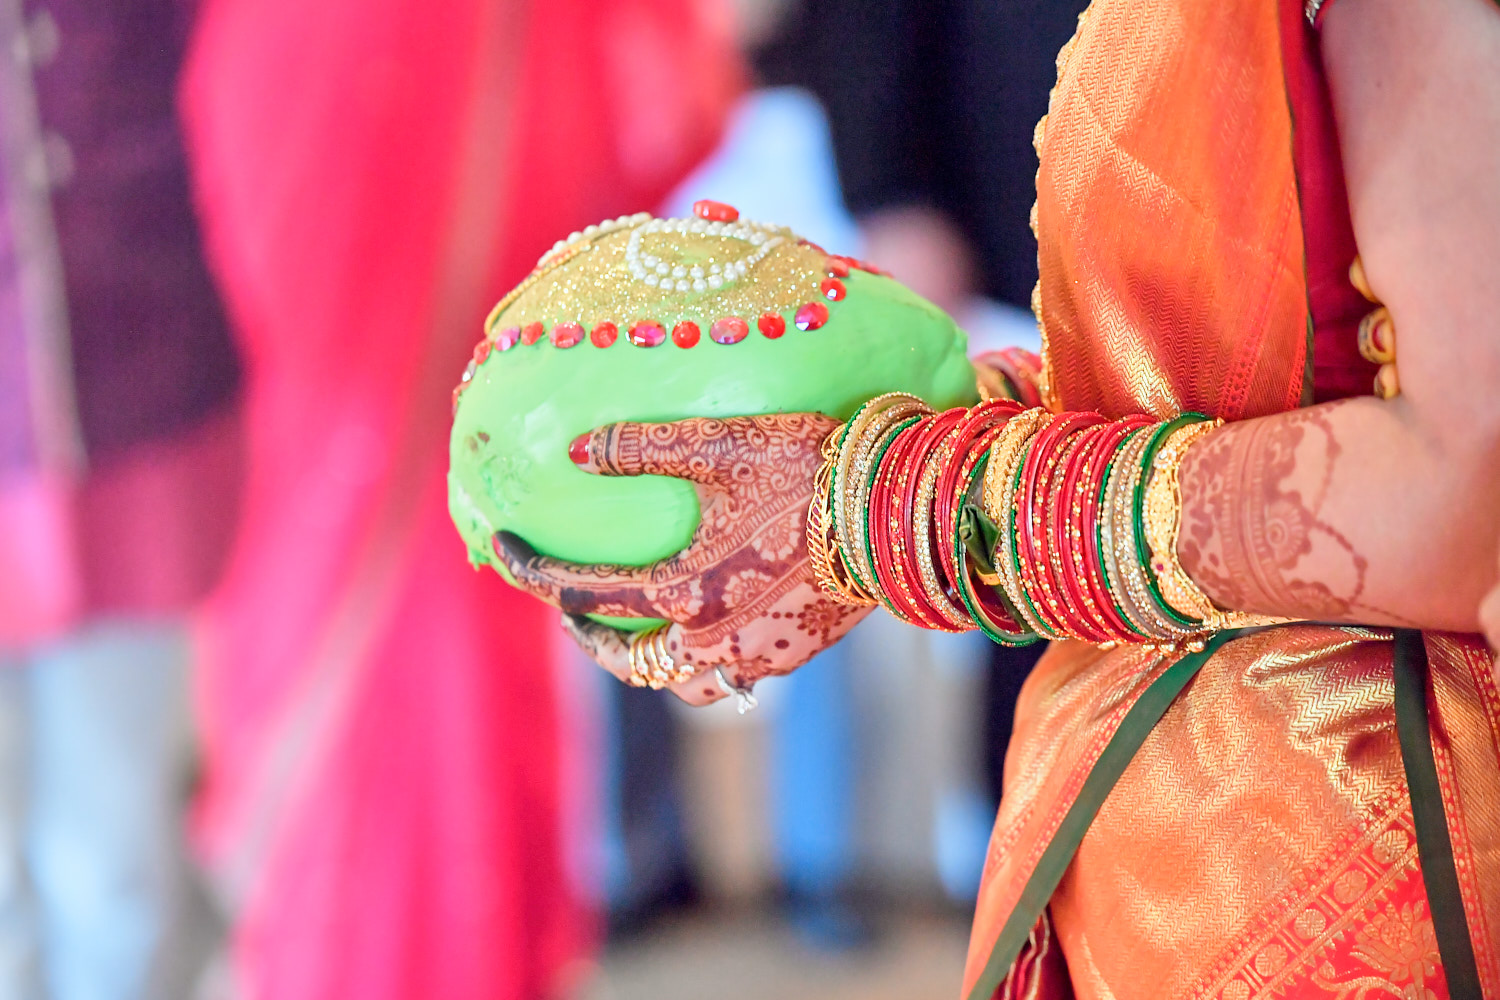 south-indian-wedding-ceremony-photography-by-afewgoodclicks-net-in-saratoga 112.jpg